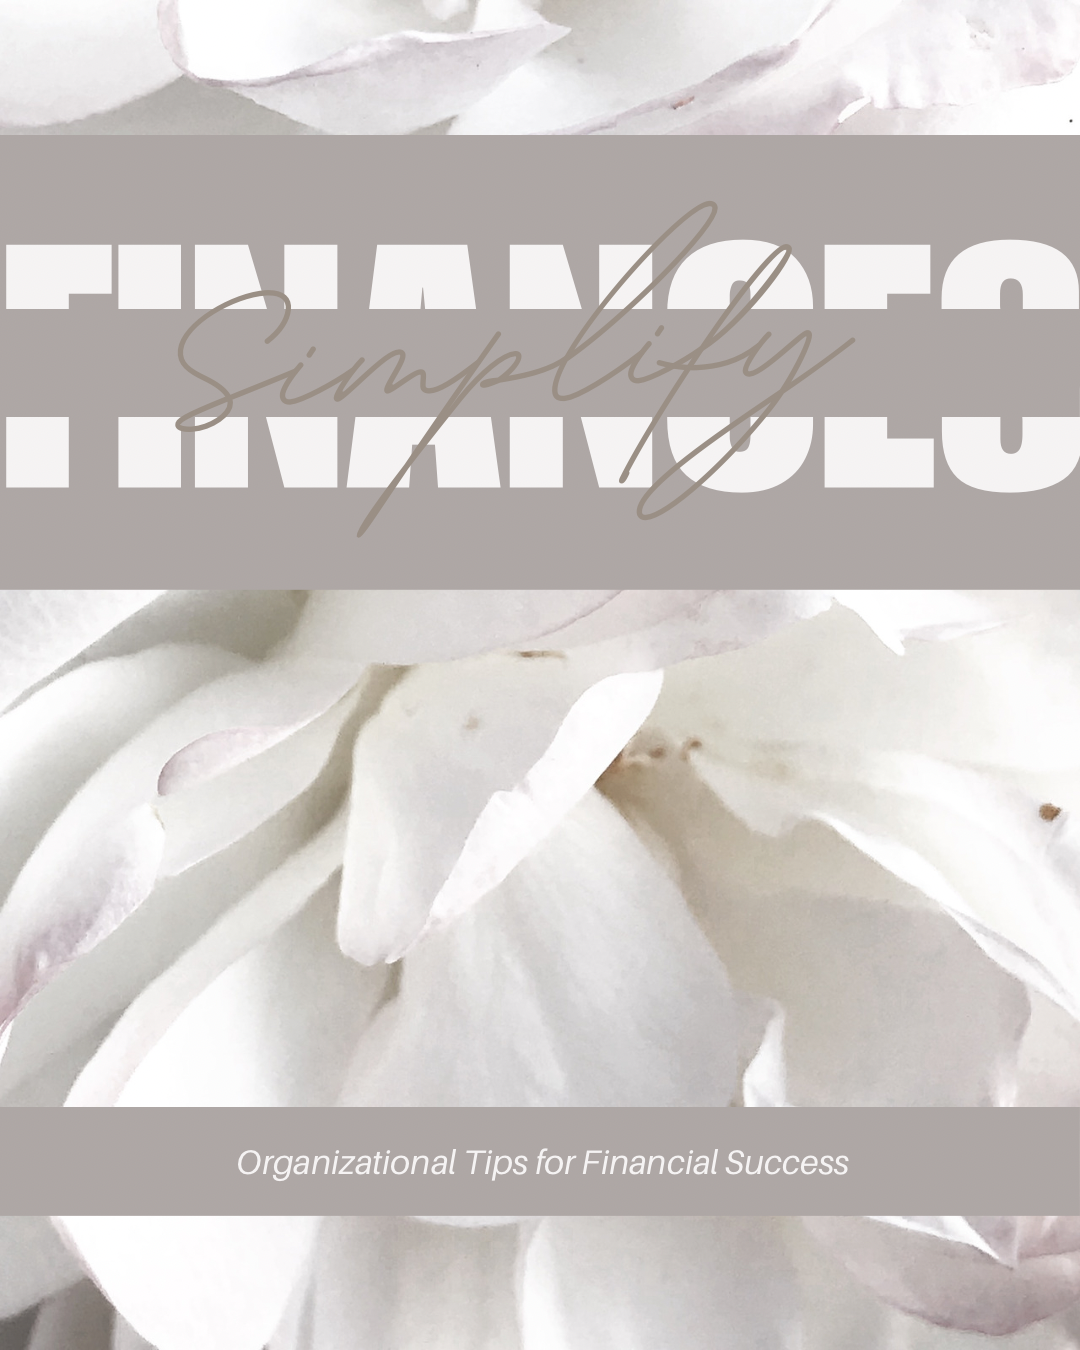 Simplifying Your Finances: Organizational Tips for Financial Success